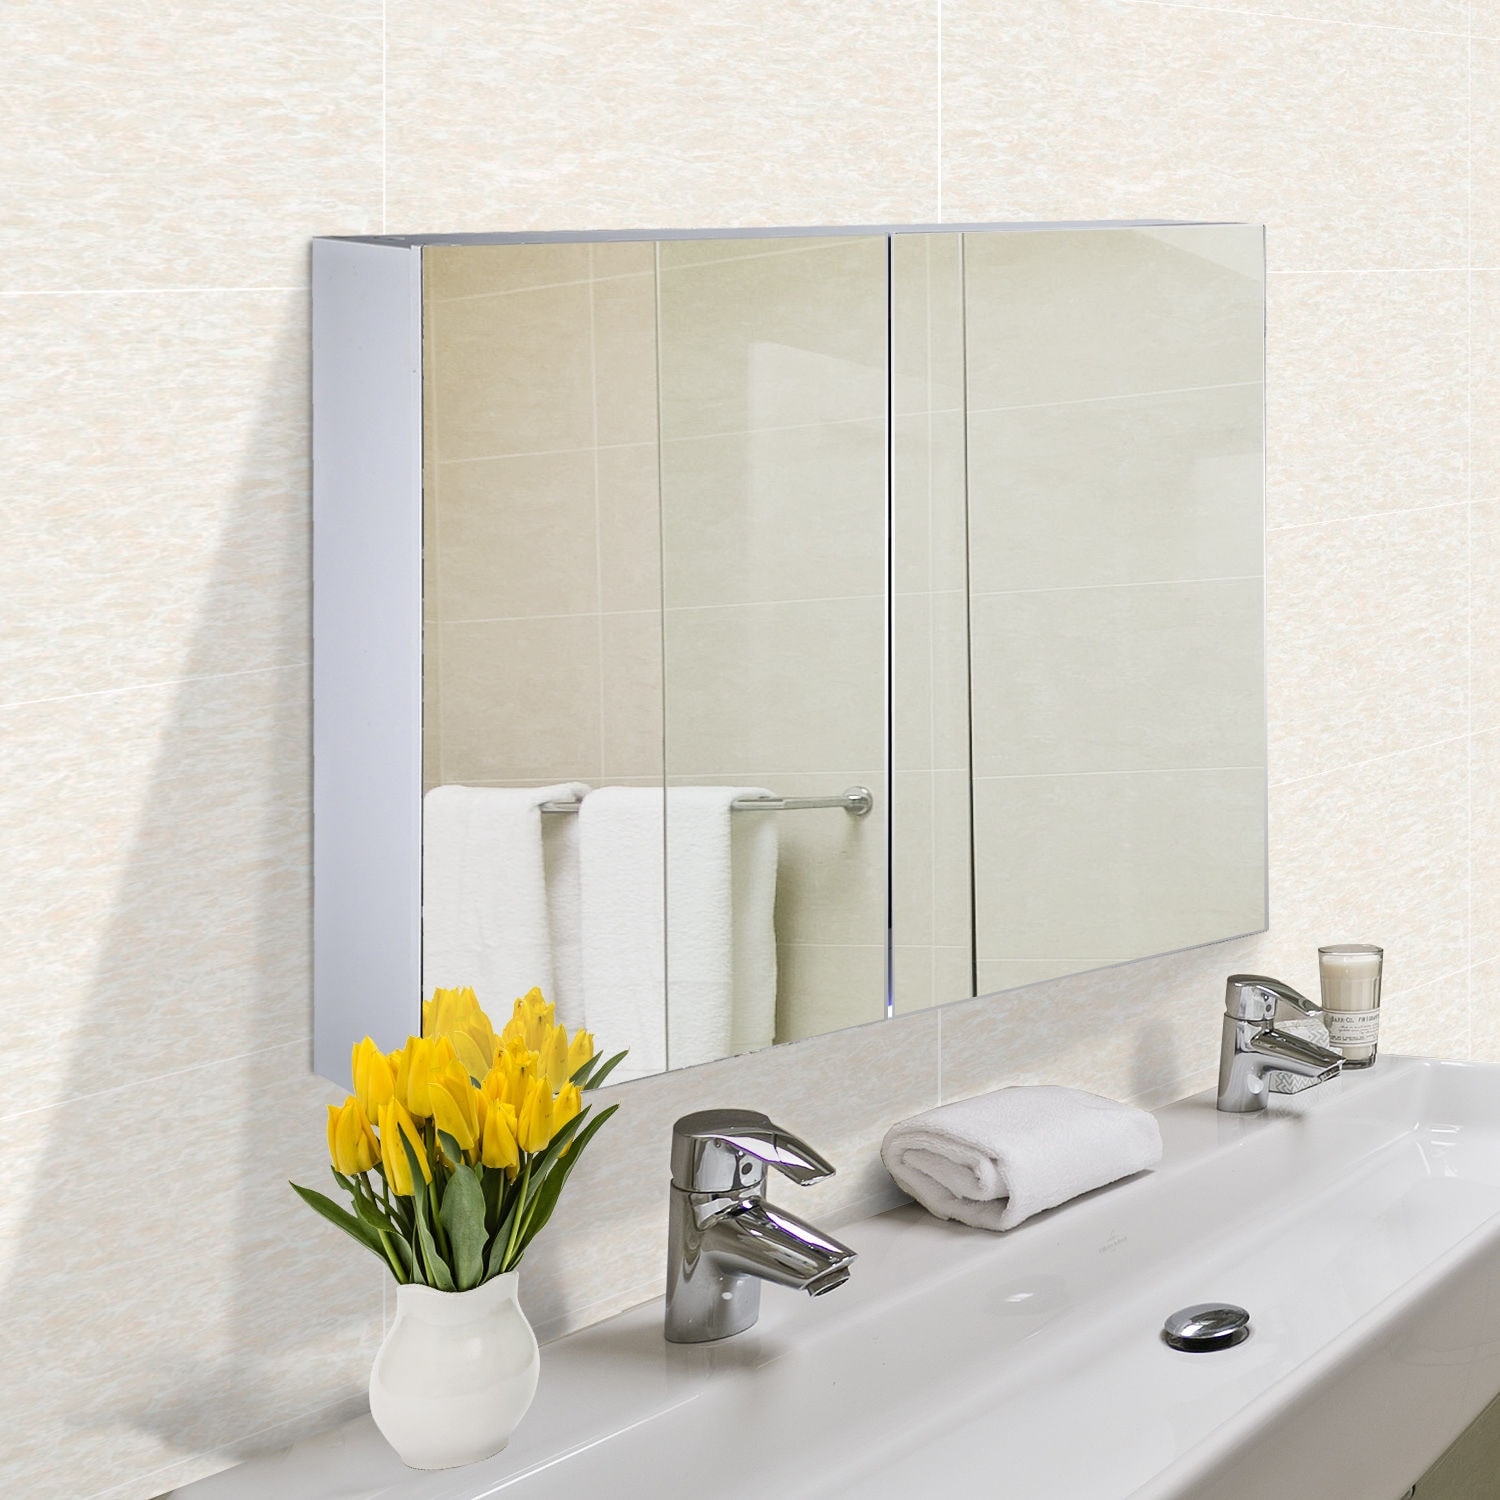 https://ak1.ostkcdn.com/images/products/is/images/direct/75f6a4b68e778daecf2842a9e44fd3e530fe5b23/HOMCOM-Double-Door-Wall-Mounted-Bathroom-Mirror-Medicine-Cabinet-with-Modern-Design%2C-Large-Storage%2C-%26-Quiet-Hinges.jpg